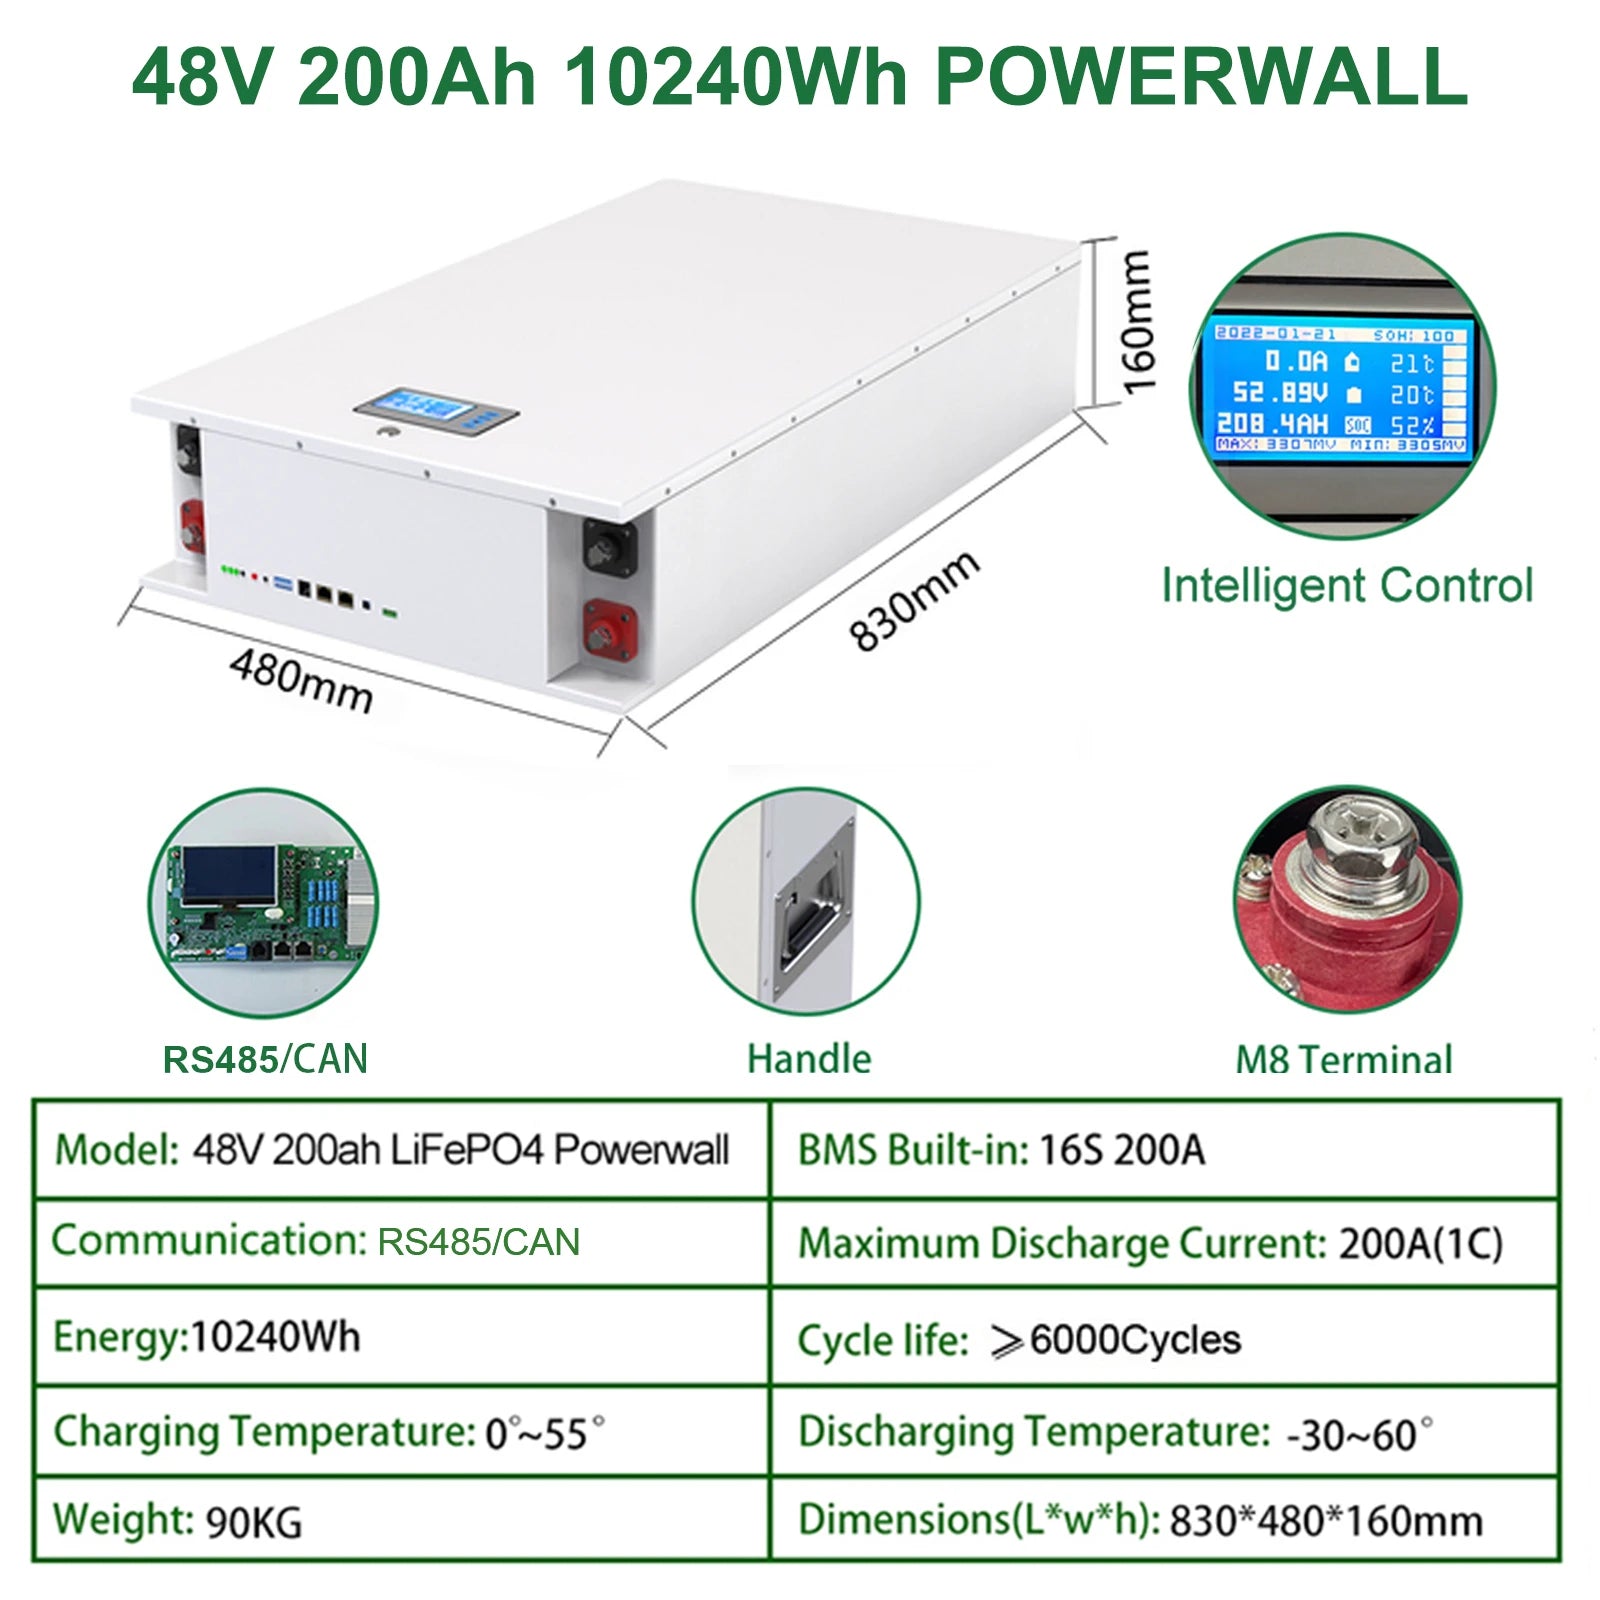 48V 200Ah Powerwall - 10Kwh LiFePO4 Battery, POWERWALL: high-capacity energy storage solution with intelligent control, 10,240Wh capacity and robust communication protocol.